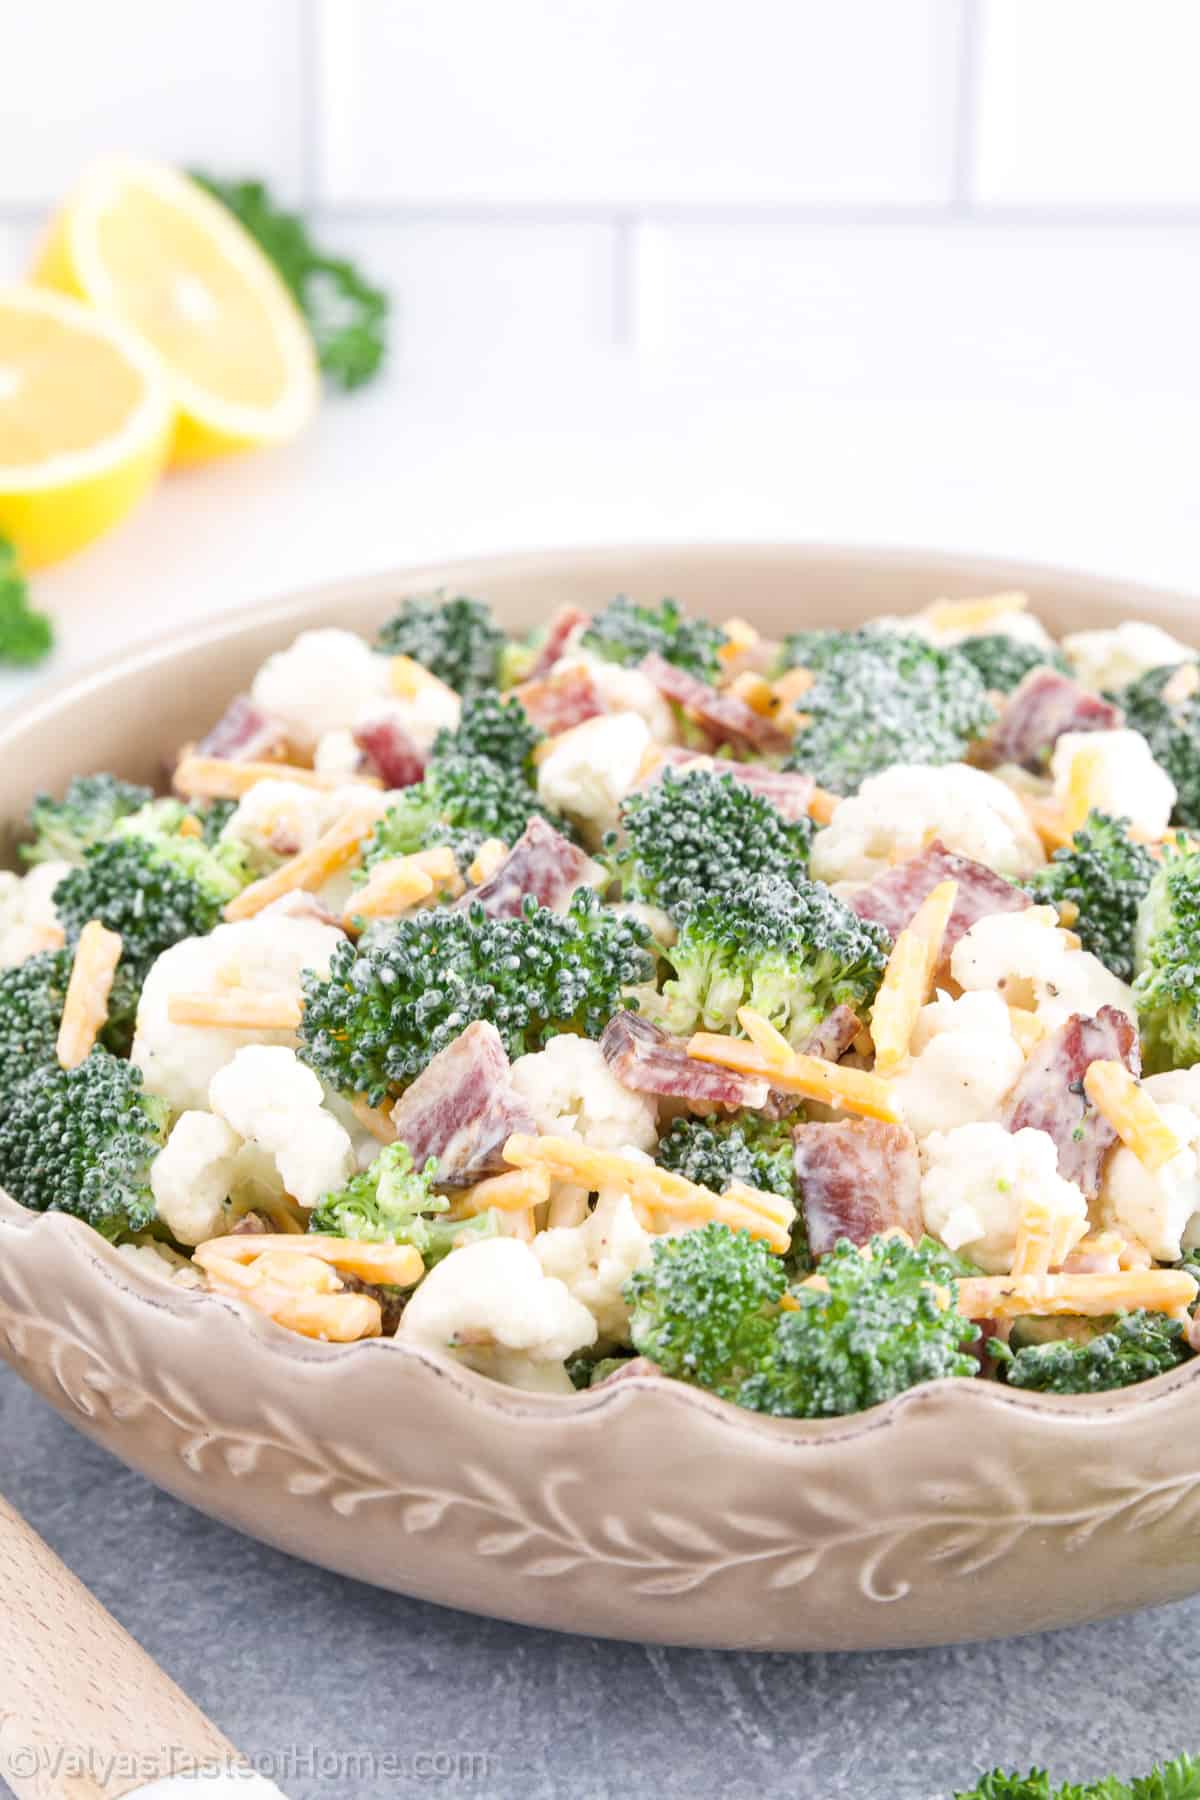 This Broccoli Cauliflower Salad recipe features tasty broccoli, creamy cauliflower, and crunchy bacon for a mouthwatering flavor you'll absolutely love!